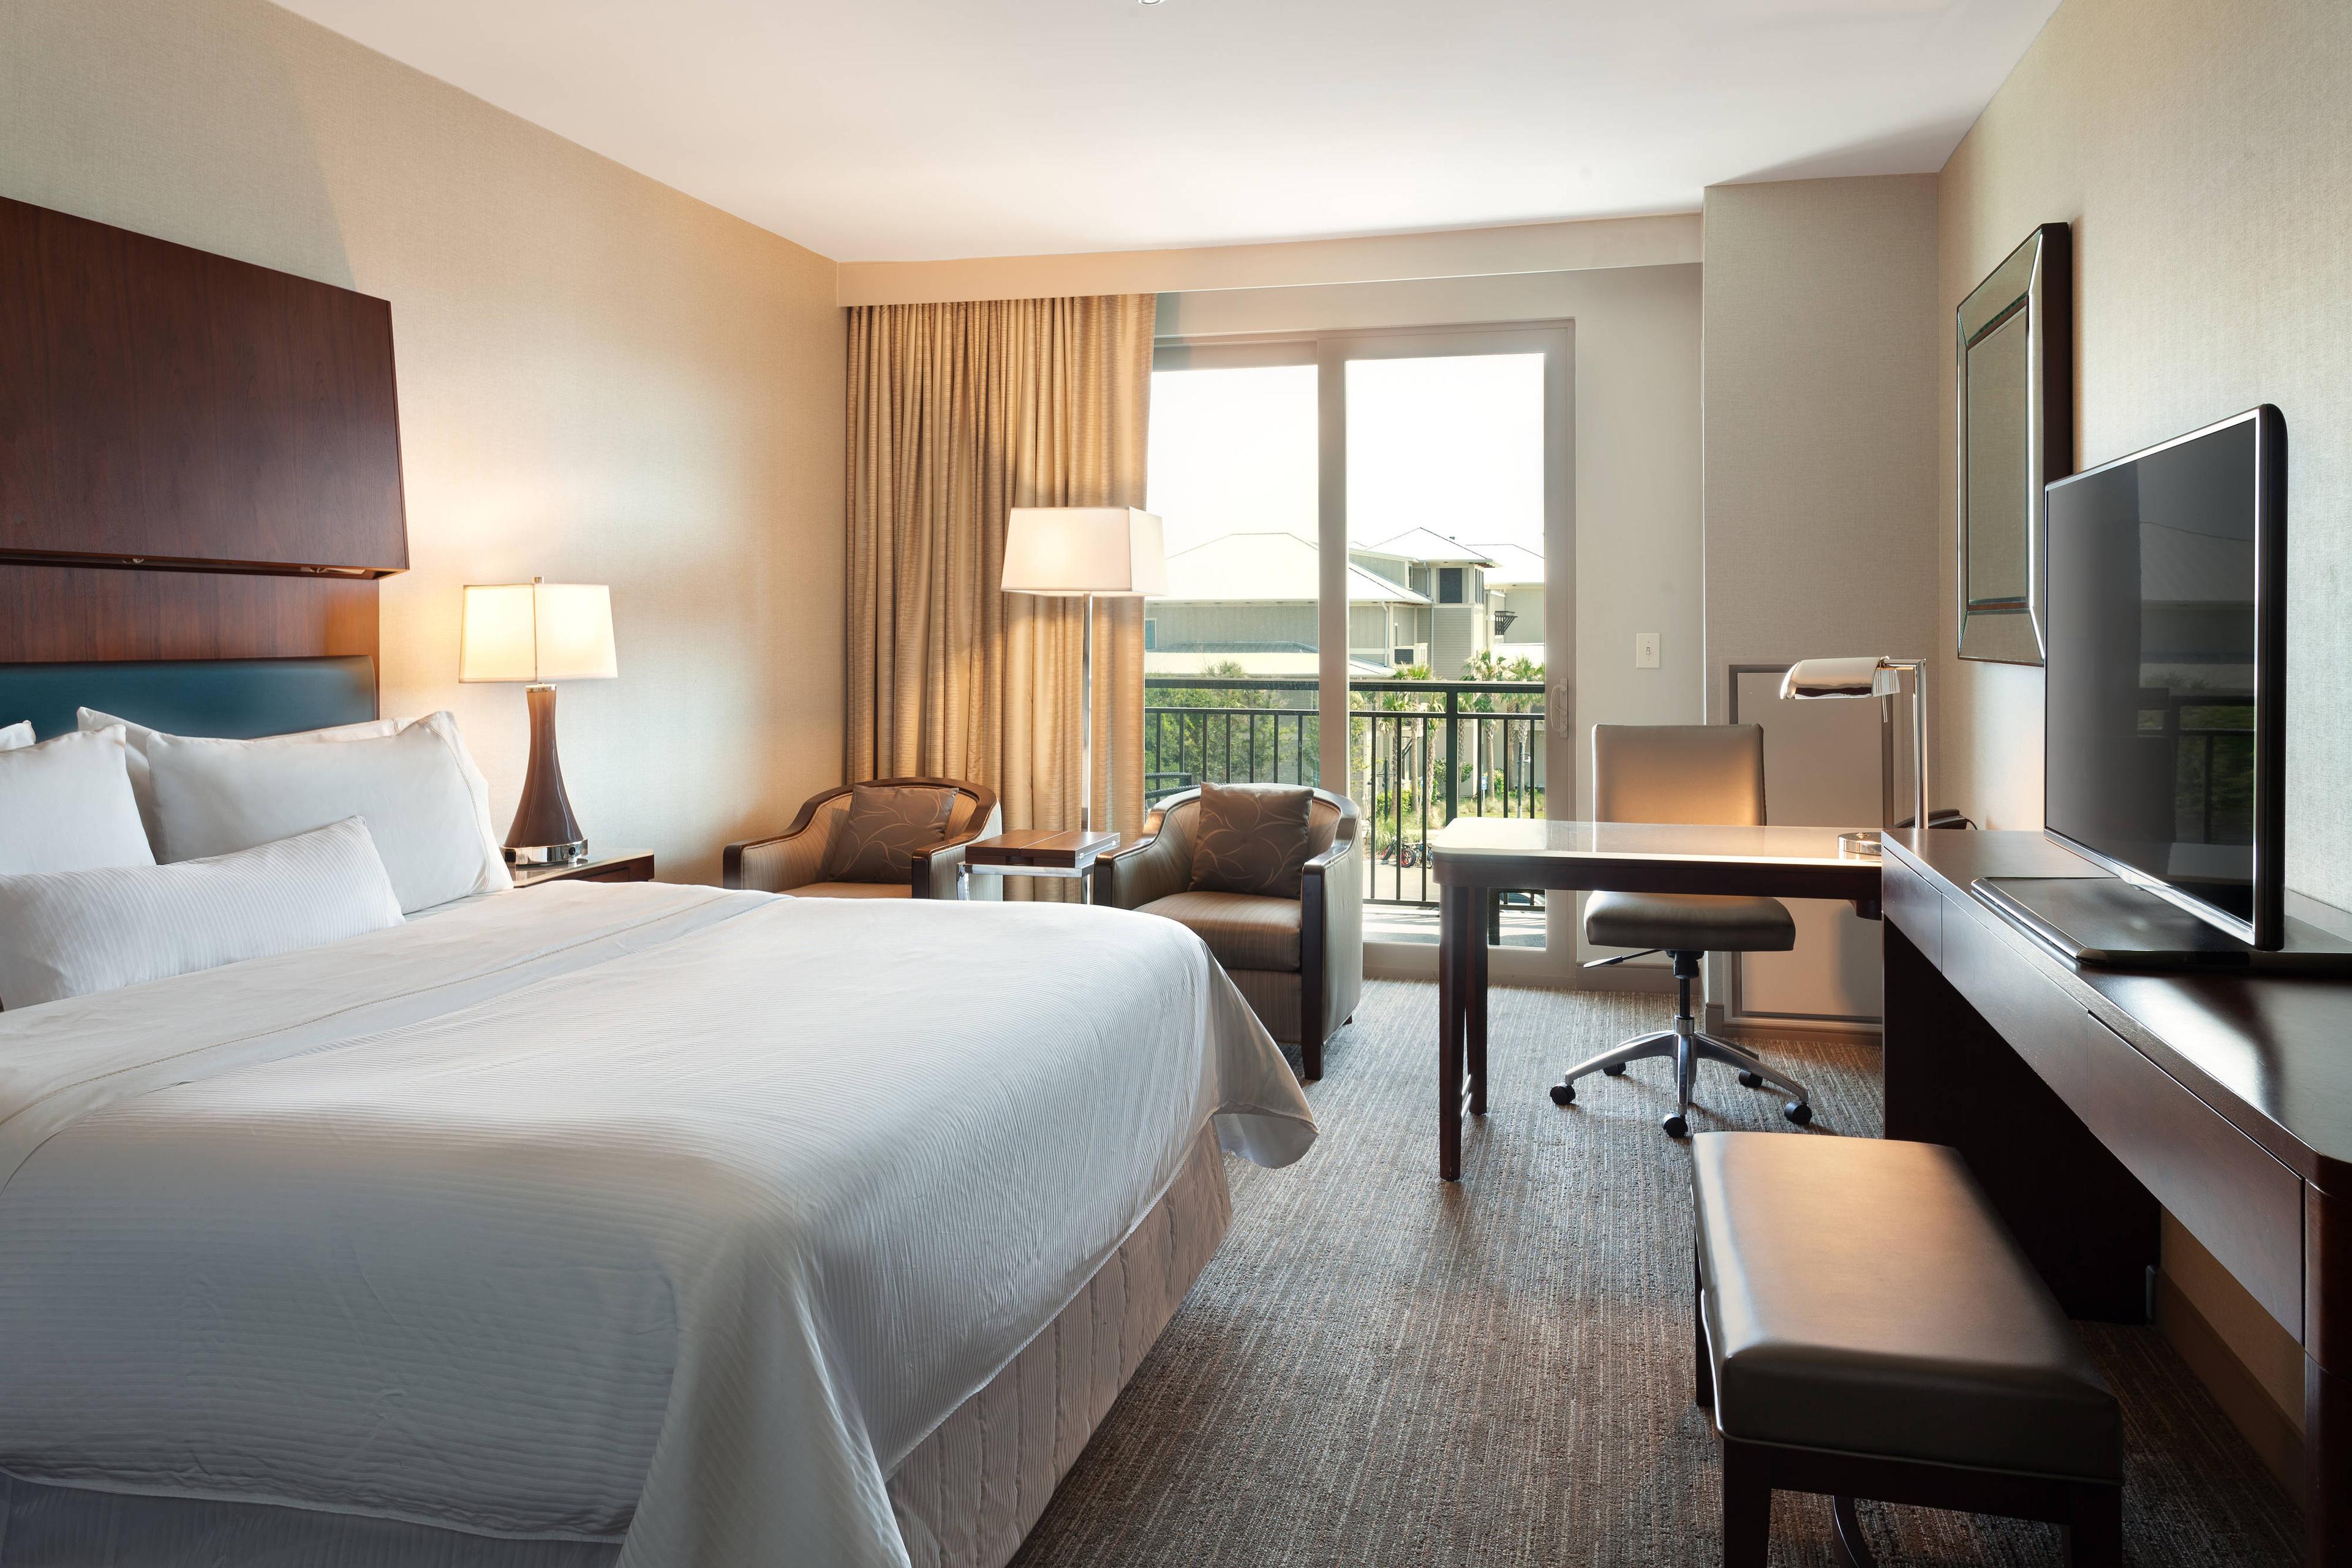 Our king partial-ocean view rooms boast views of the Atlantic Ocean, all while offering furnished step-out balconies and luxurious beds.